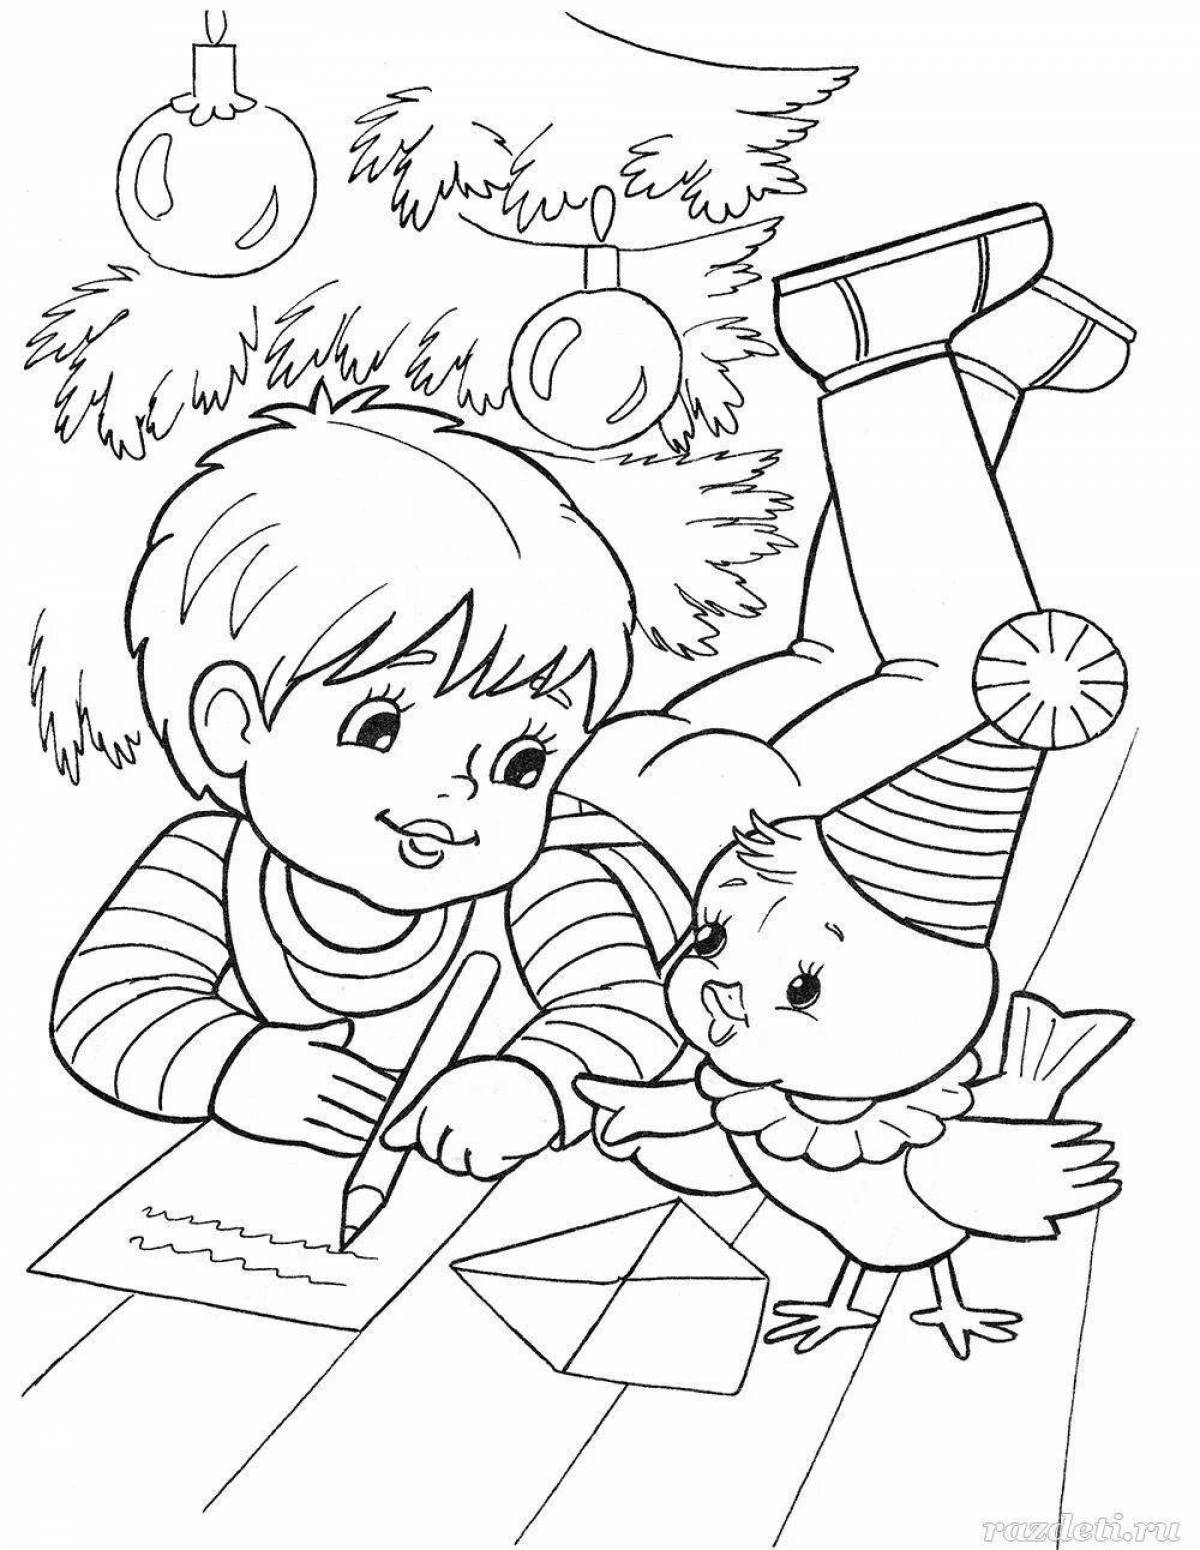 Amazing Christmas coloring book for boys